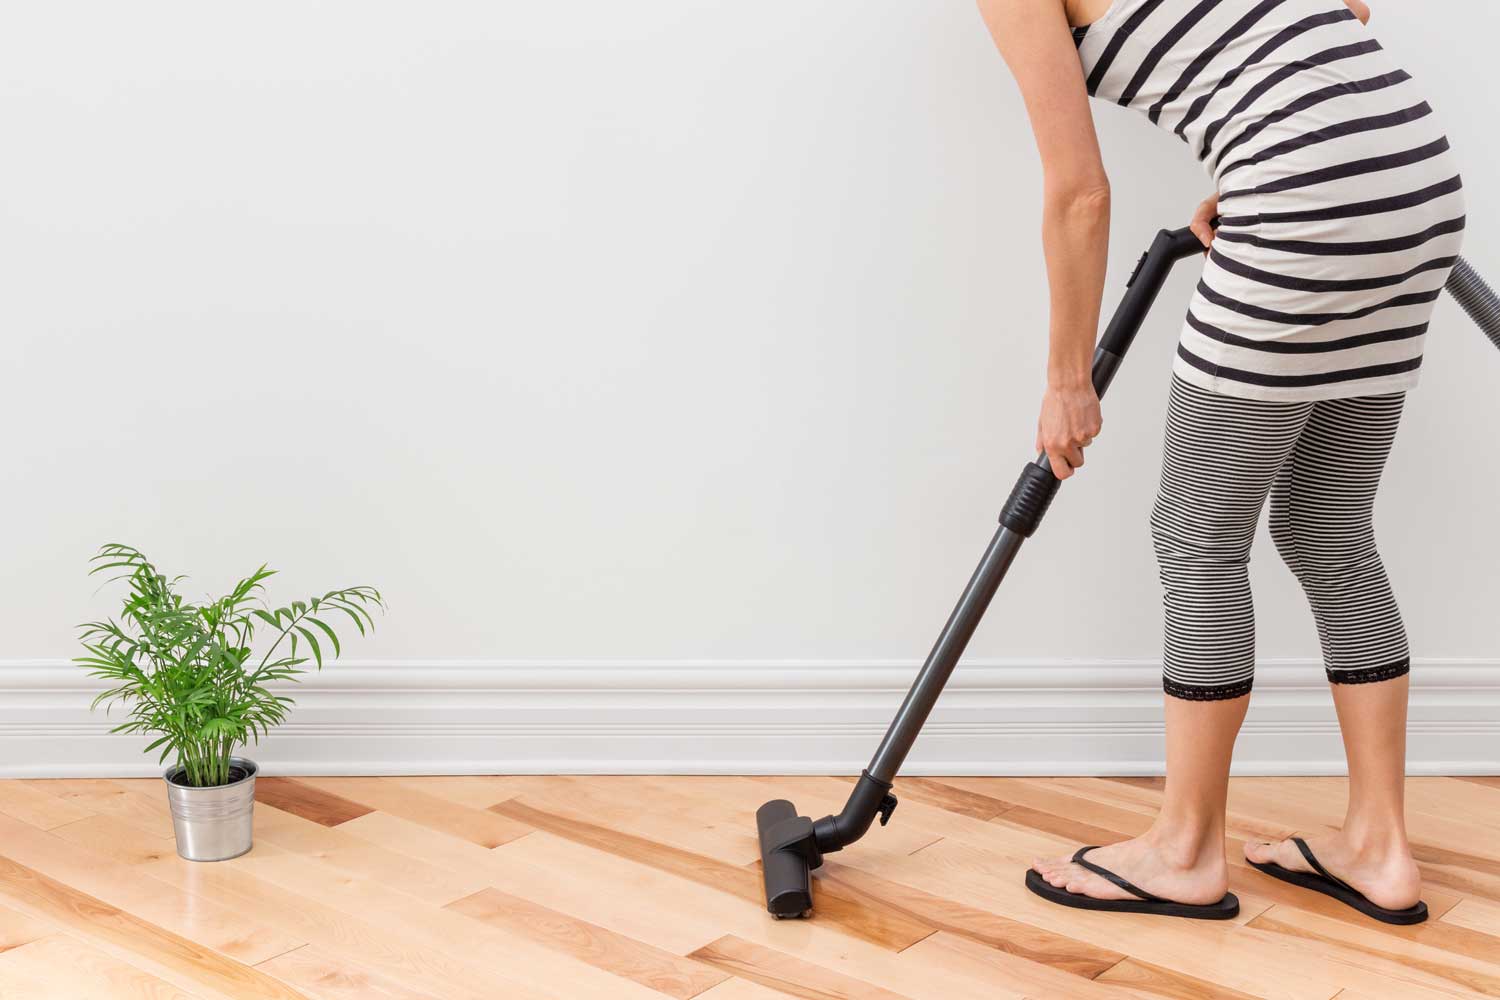 Regulary vacuum or sweep floors to remove dirt and keep your home floors looking amazing - tips from Footprints Floors in McKinney / Plano.